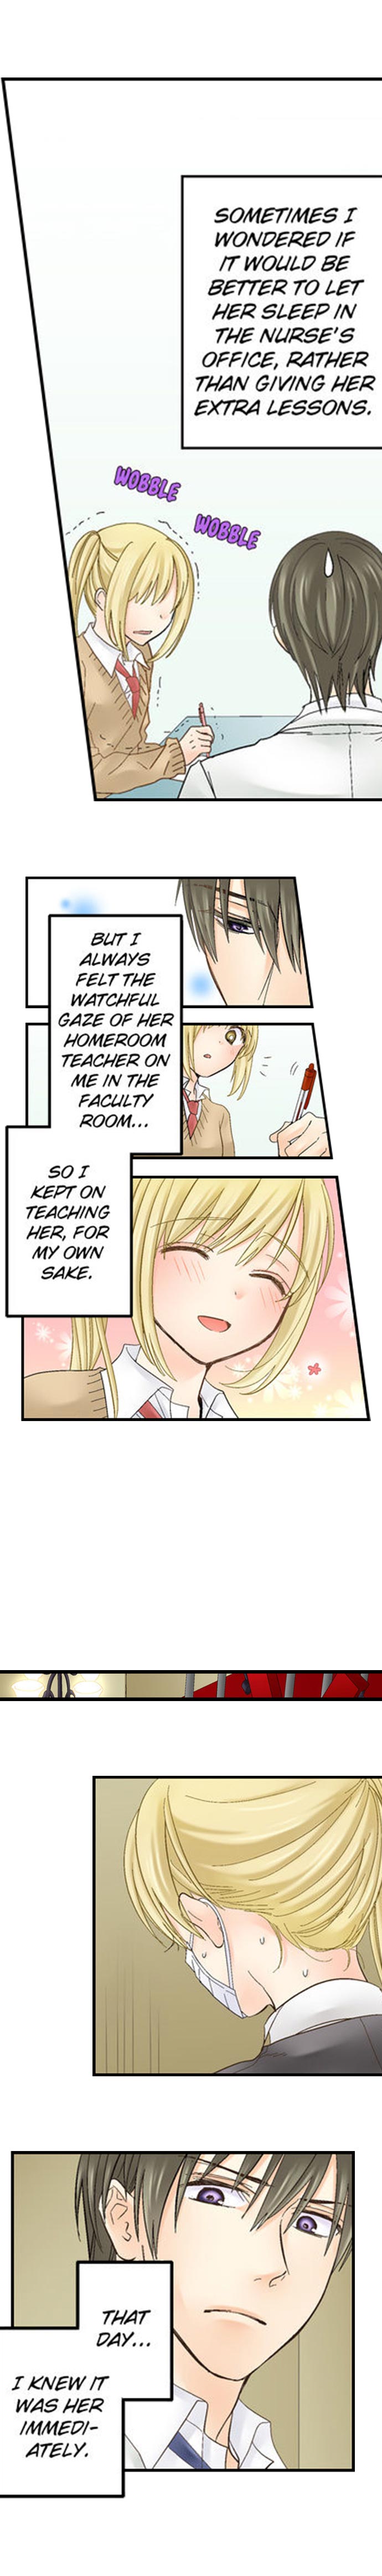 Running a Love Hotel with My Math Teacher - Chapter 19 Page 5